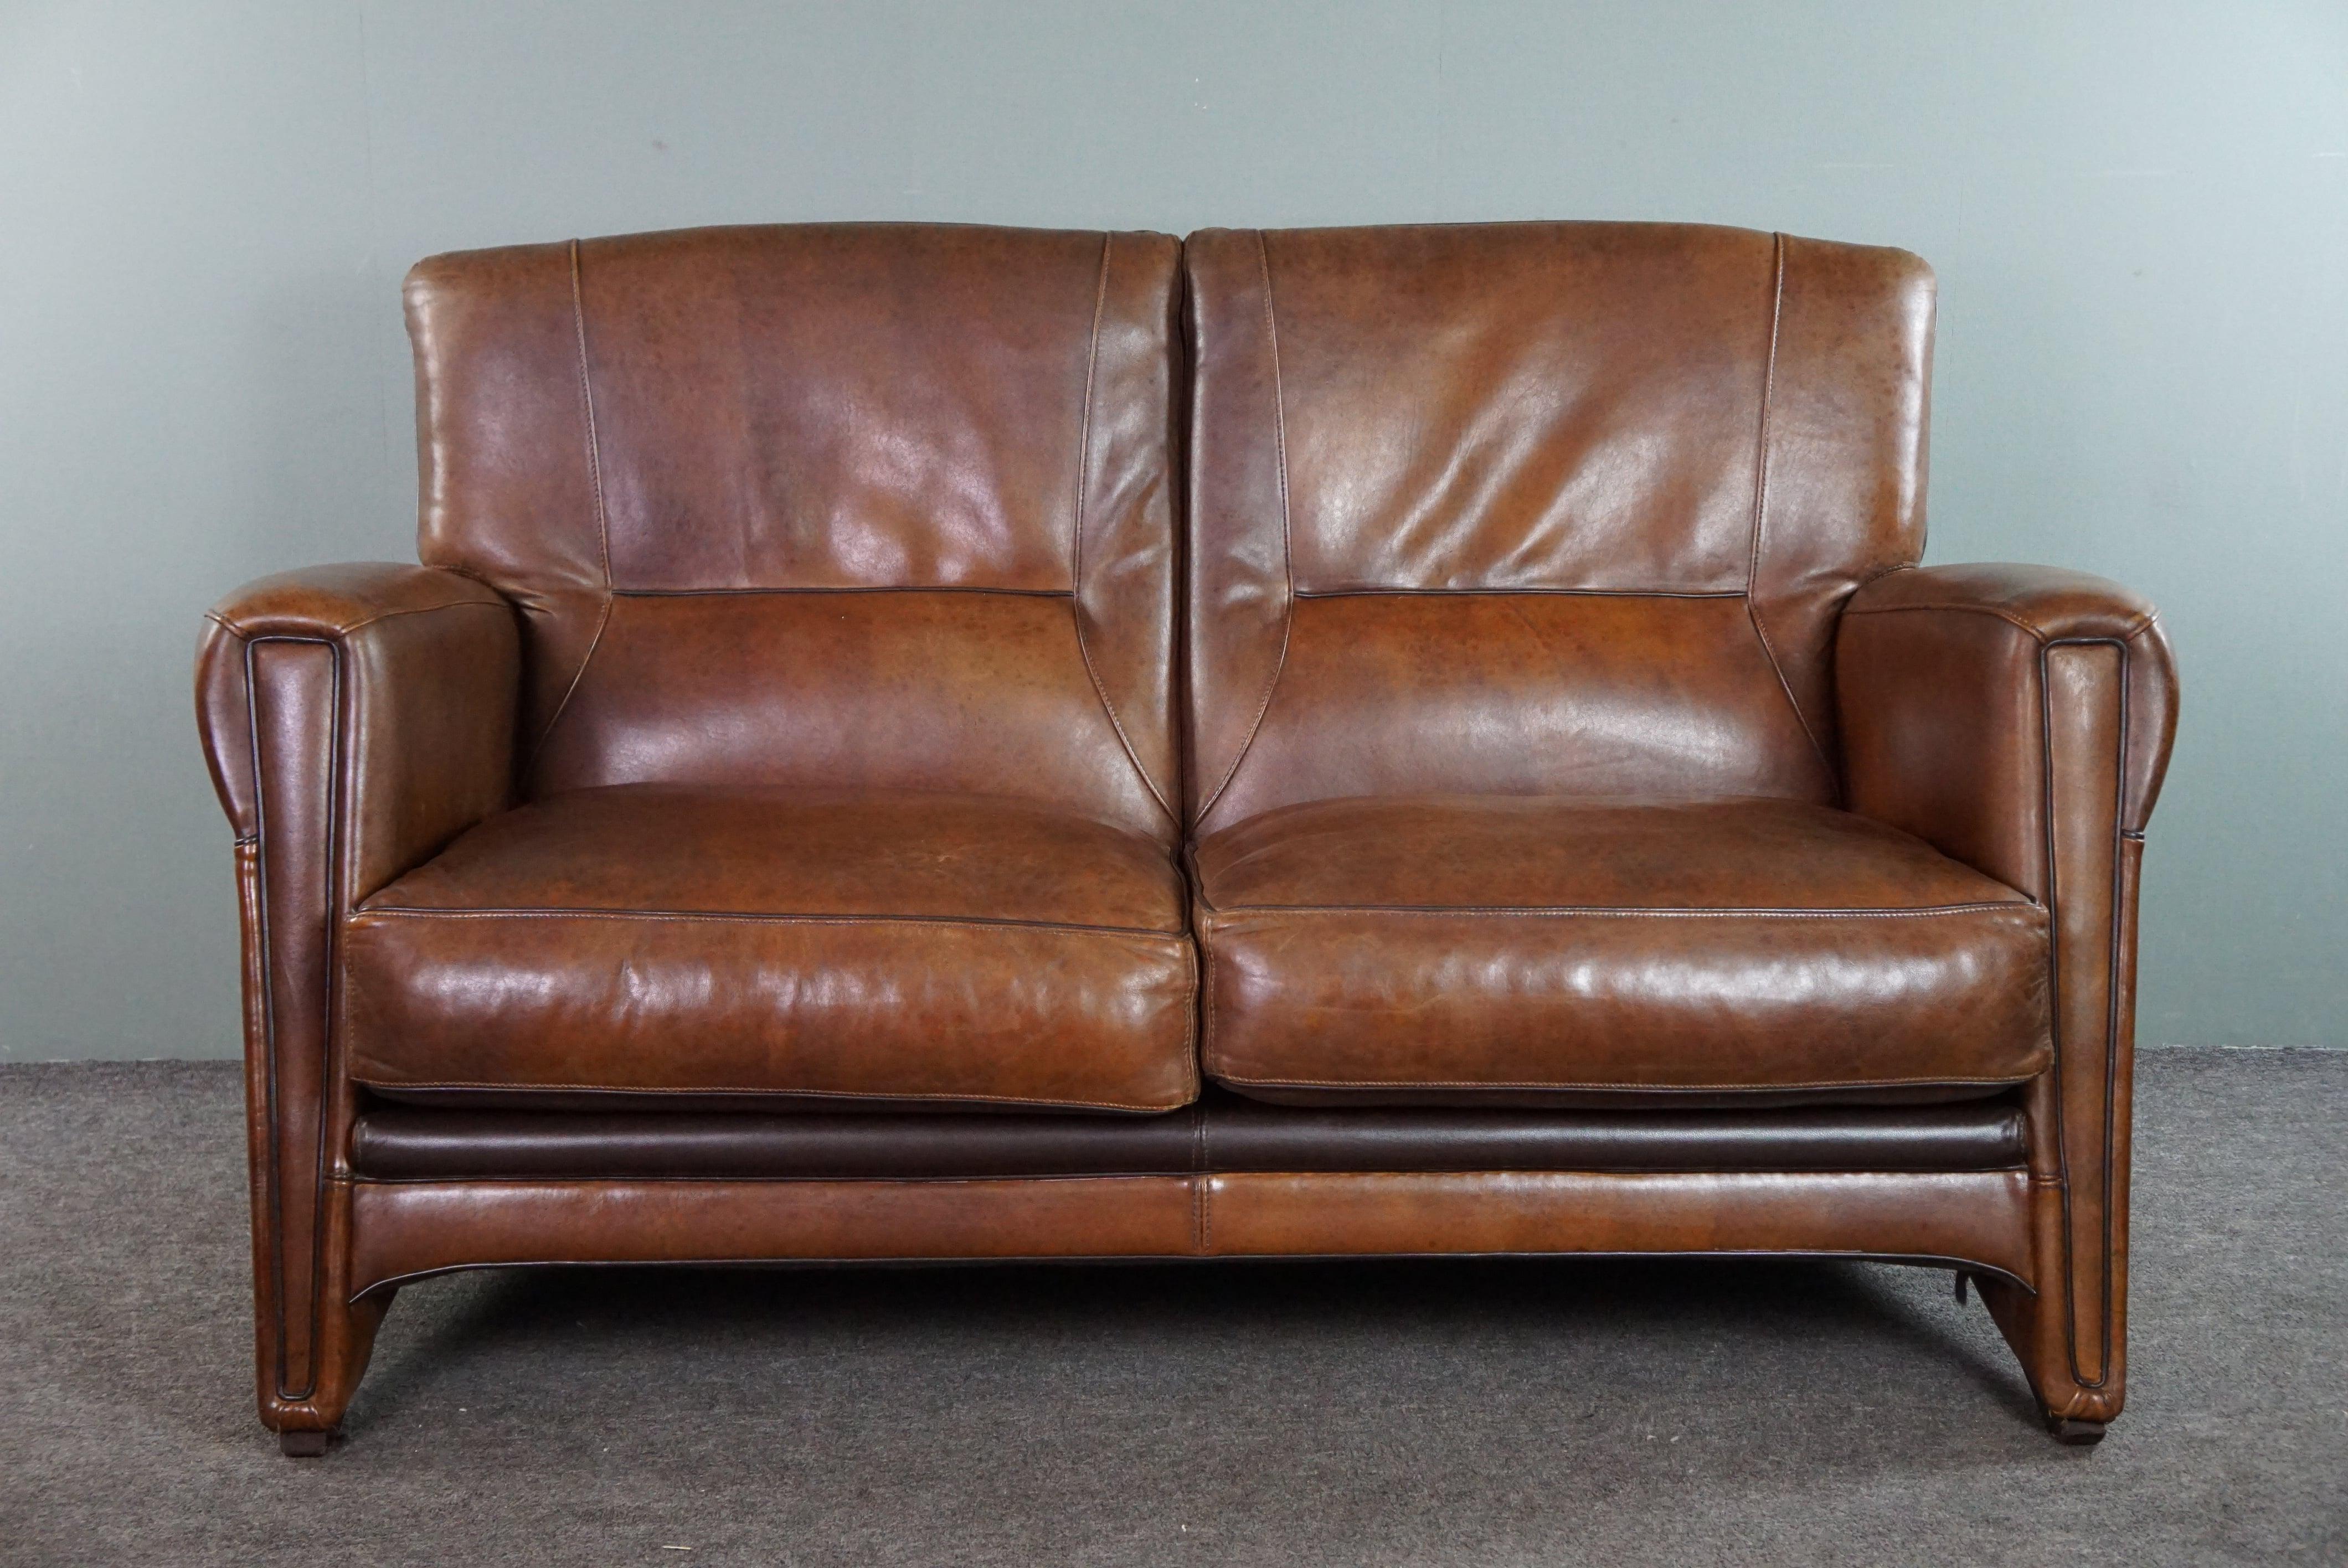 Offered is this beautiful set of a sheep leather design sofa and armchair in good condition.

With the purchase of this set, you will immediately fill your living room or office with something comfortable, beautiful, and unique. Both the sofa and